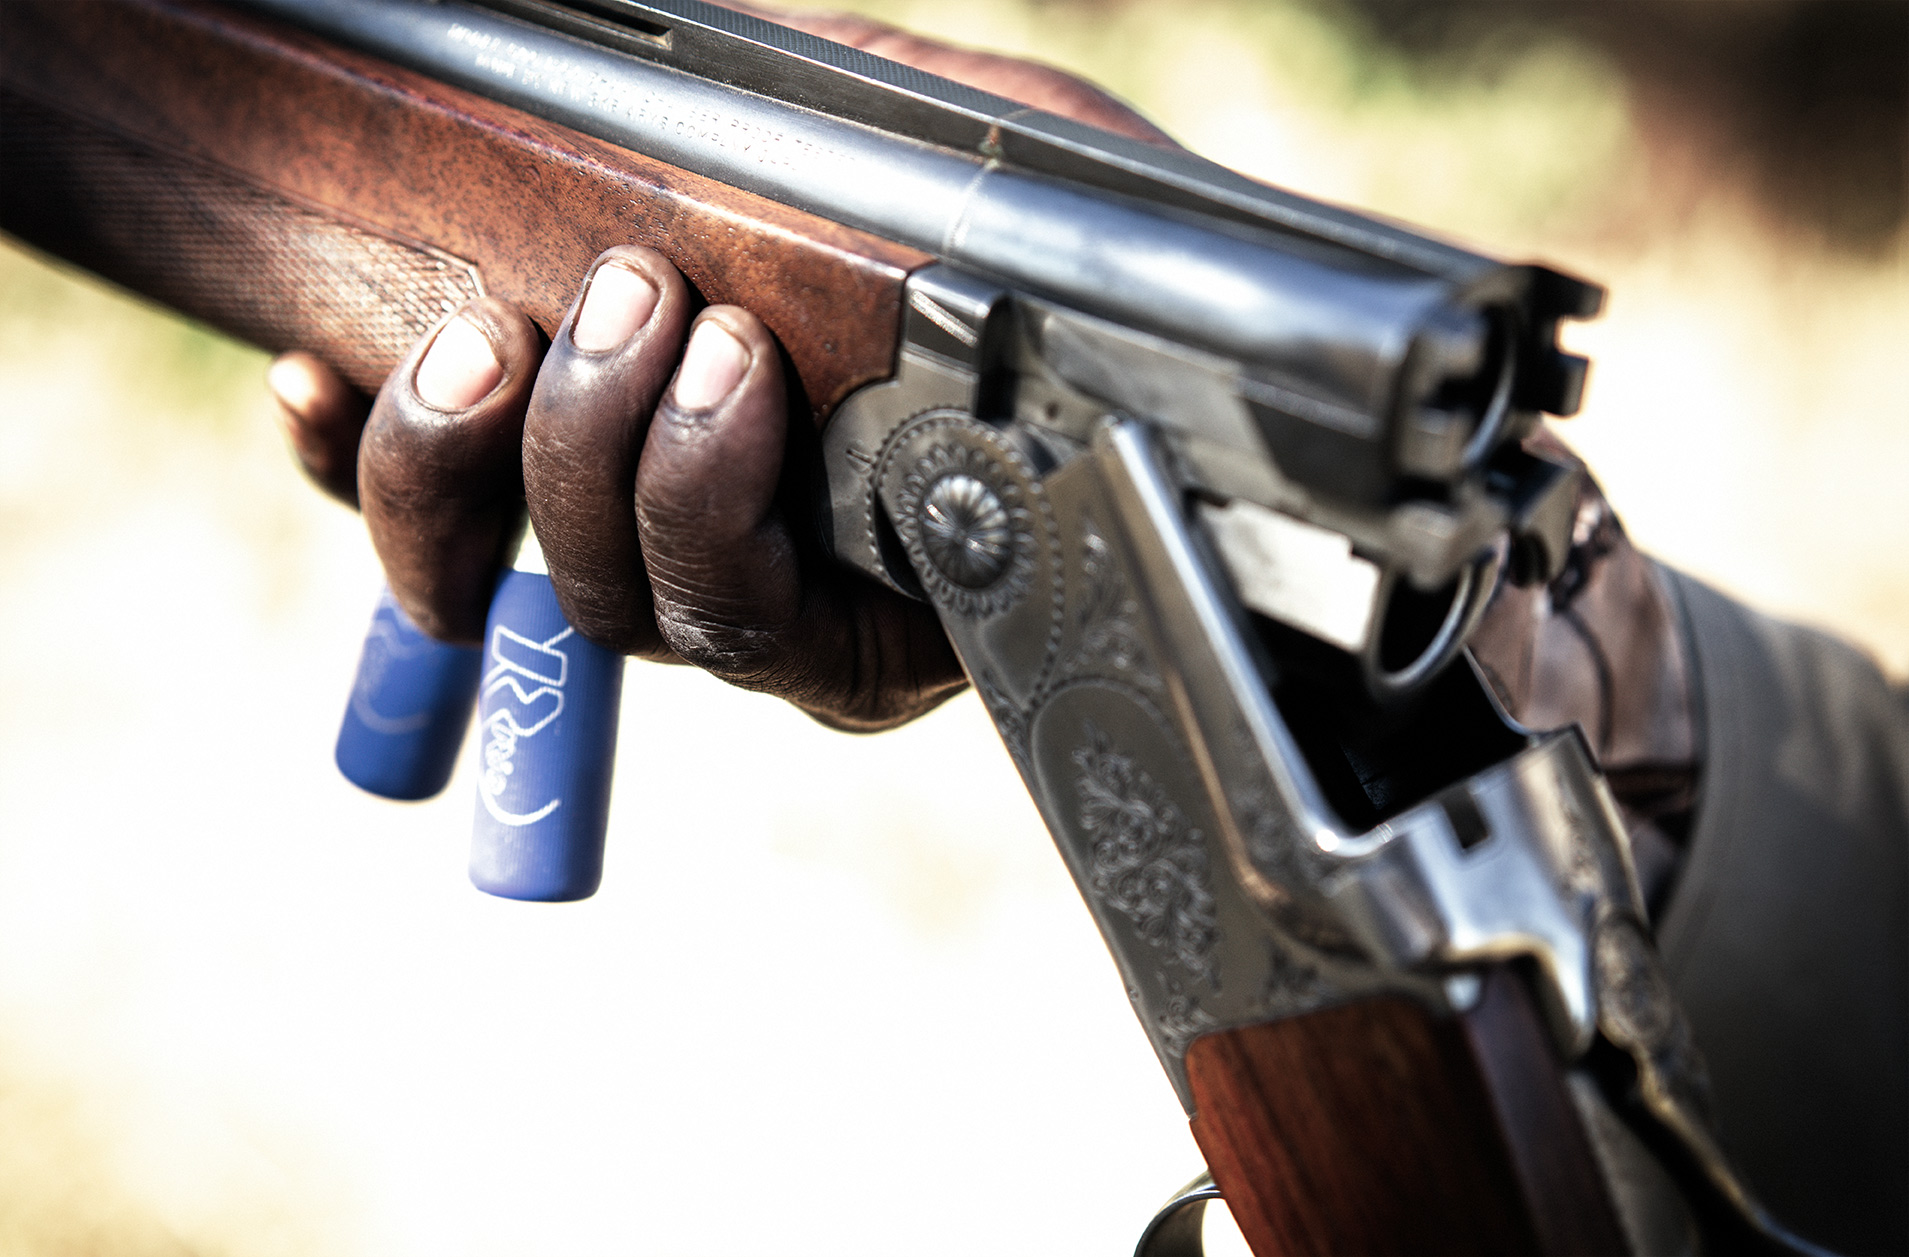 The hands of a hunter holding a shotgun in Namibia, Africa